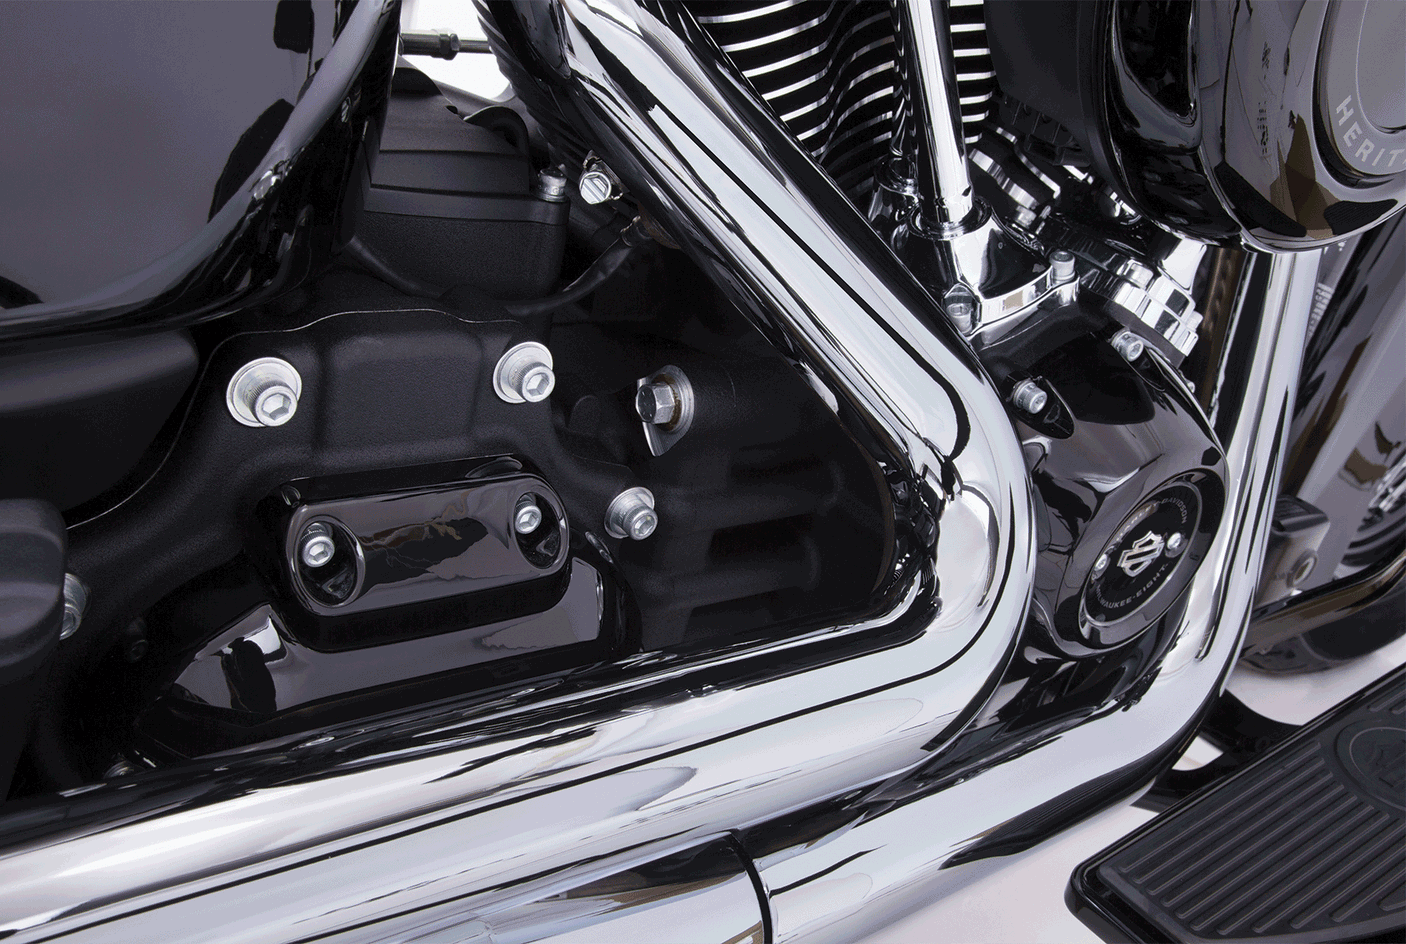  Engine Bolt Cover Kits For Milwaukee 8 | M8|  For Harley-Davidson | Street Glide, Road Glide, Ultra, Limited